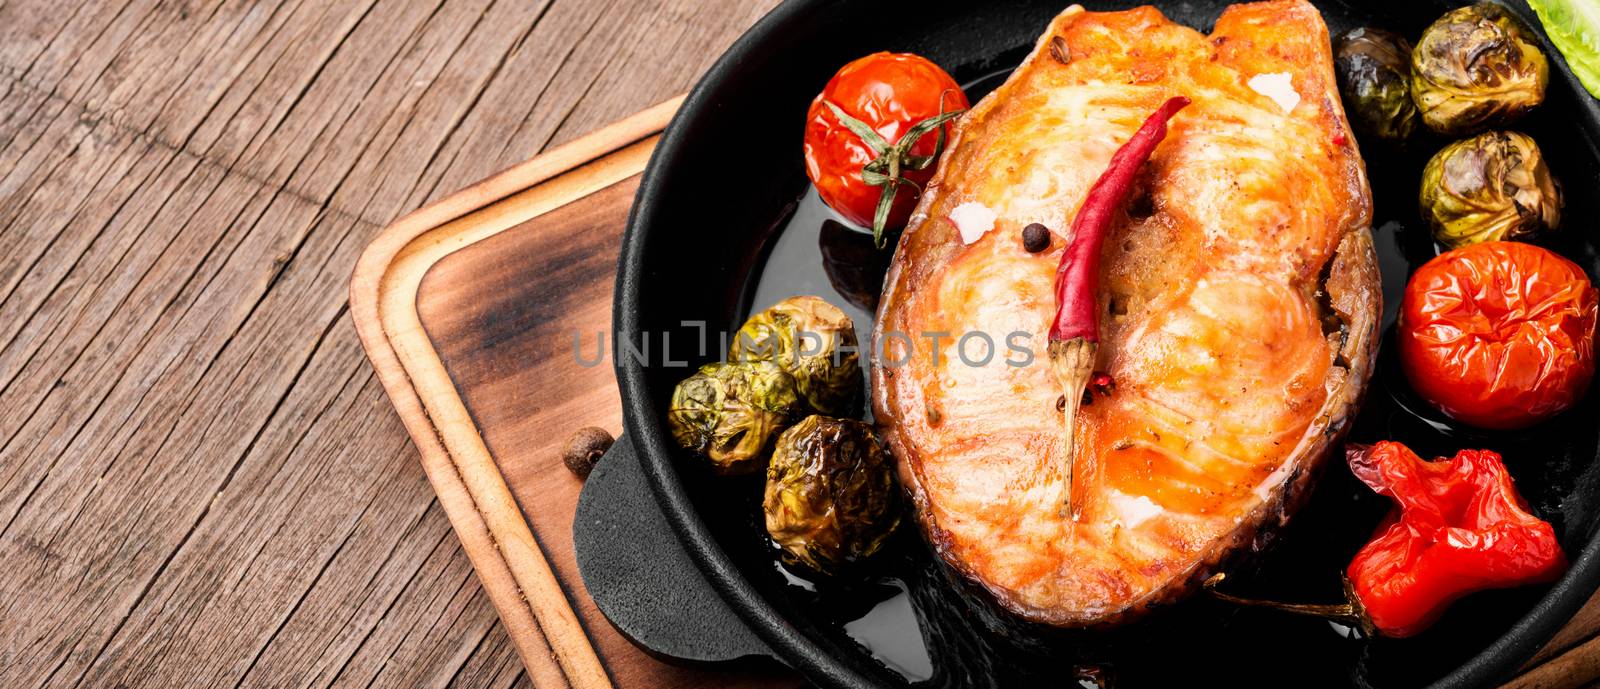 Baked salmon with tomato, pepper and cabbage.Fish steak with vegetable garnish.Long banner